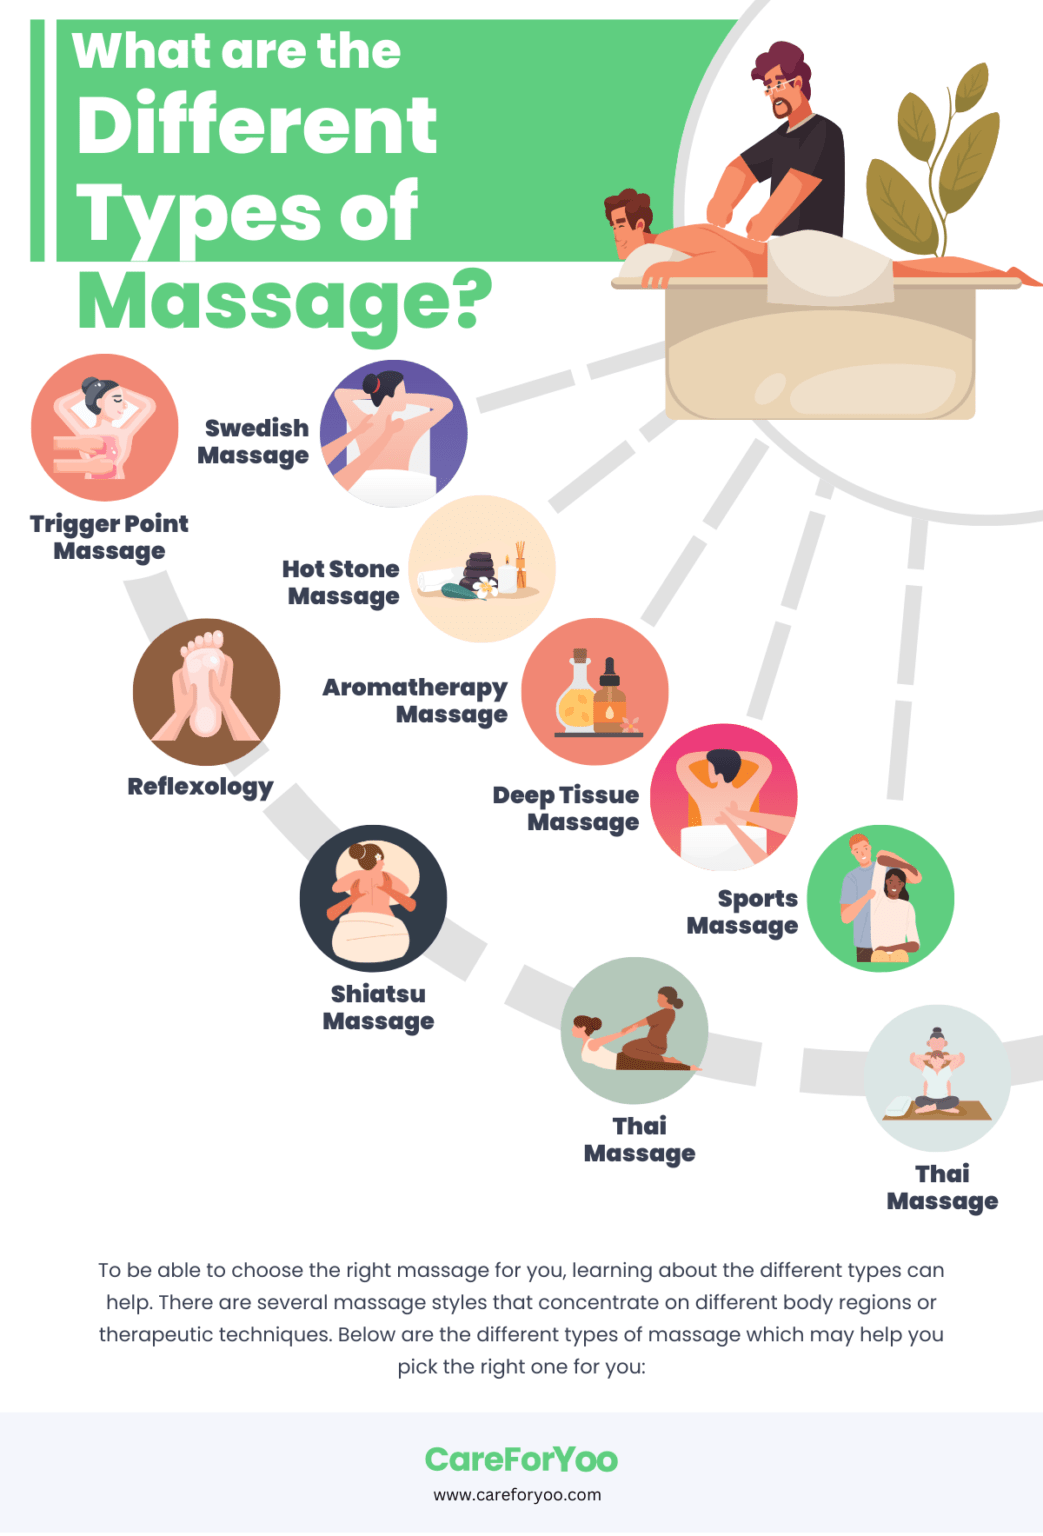 Guide to various massage techniques